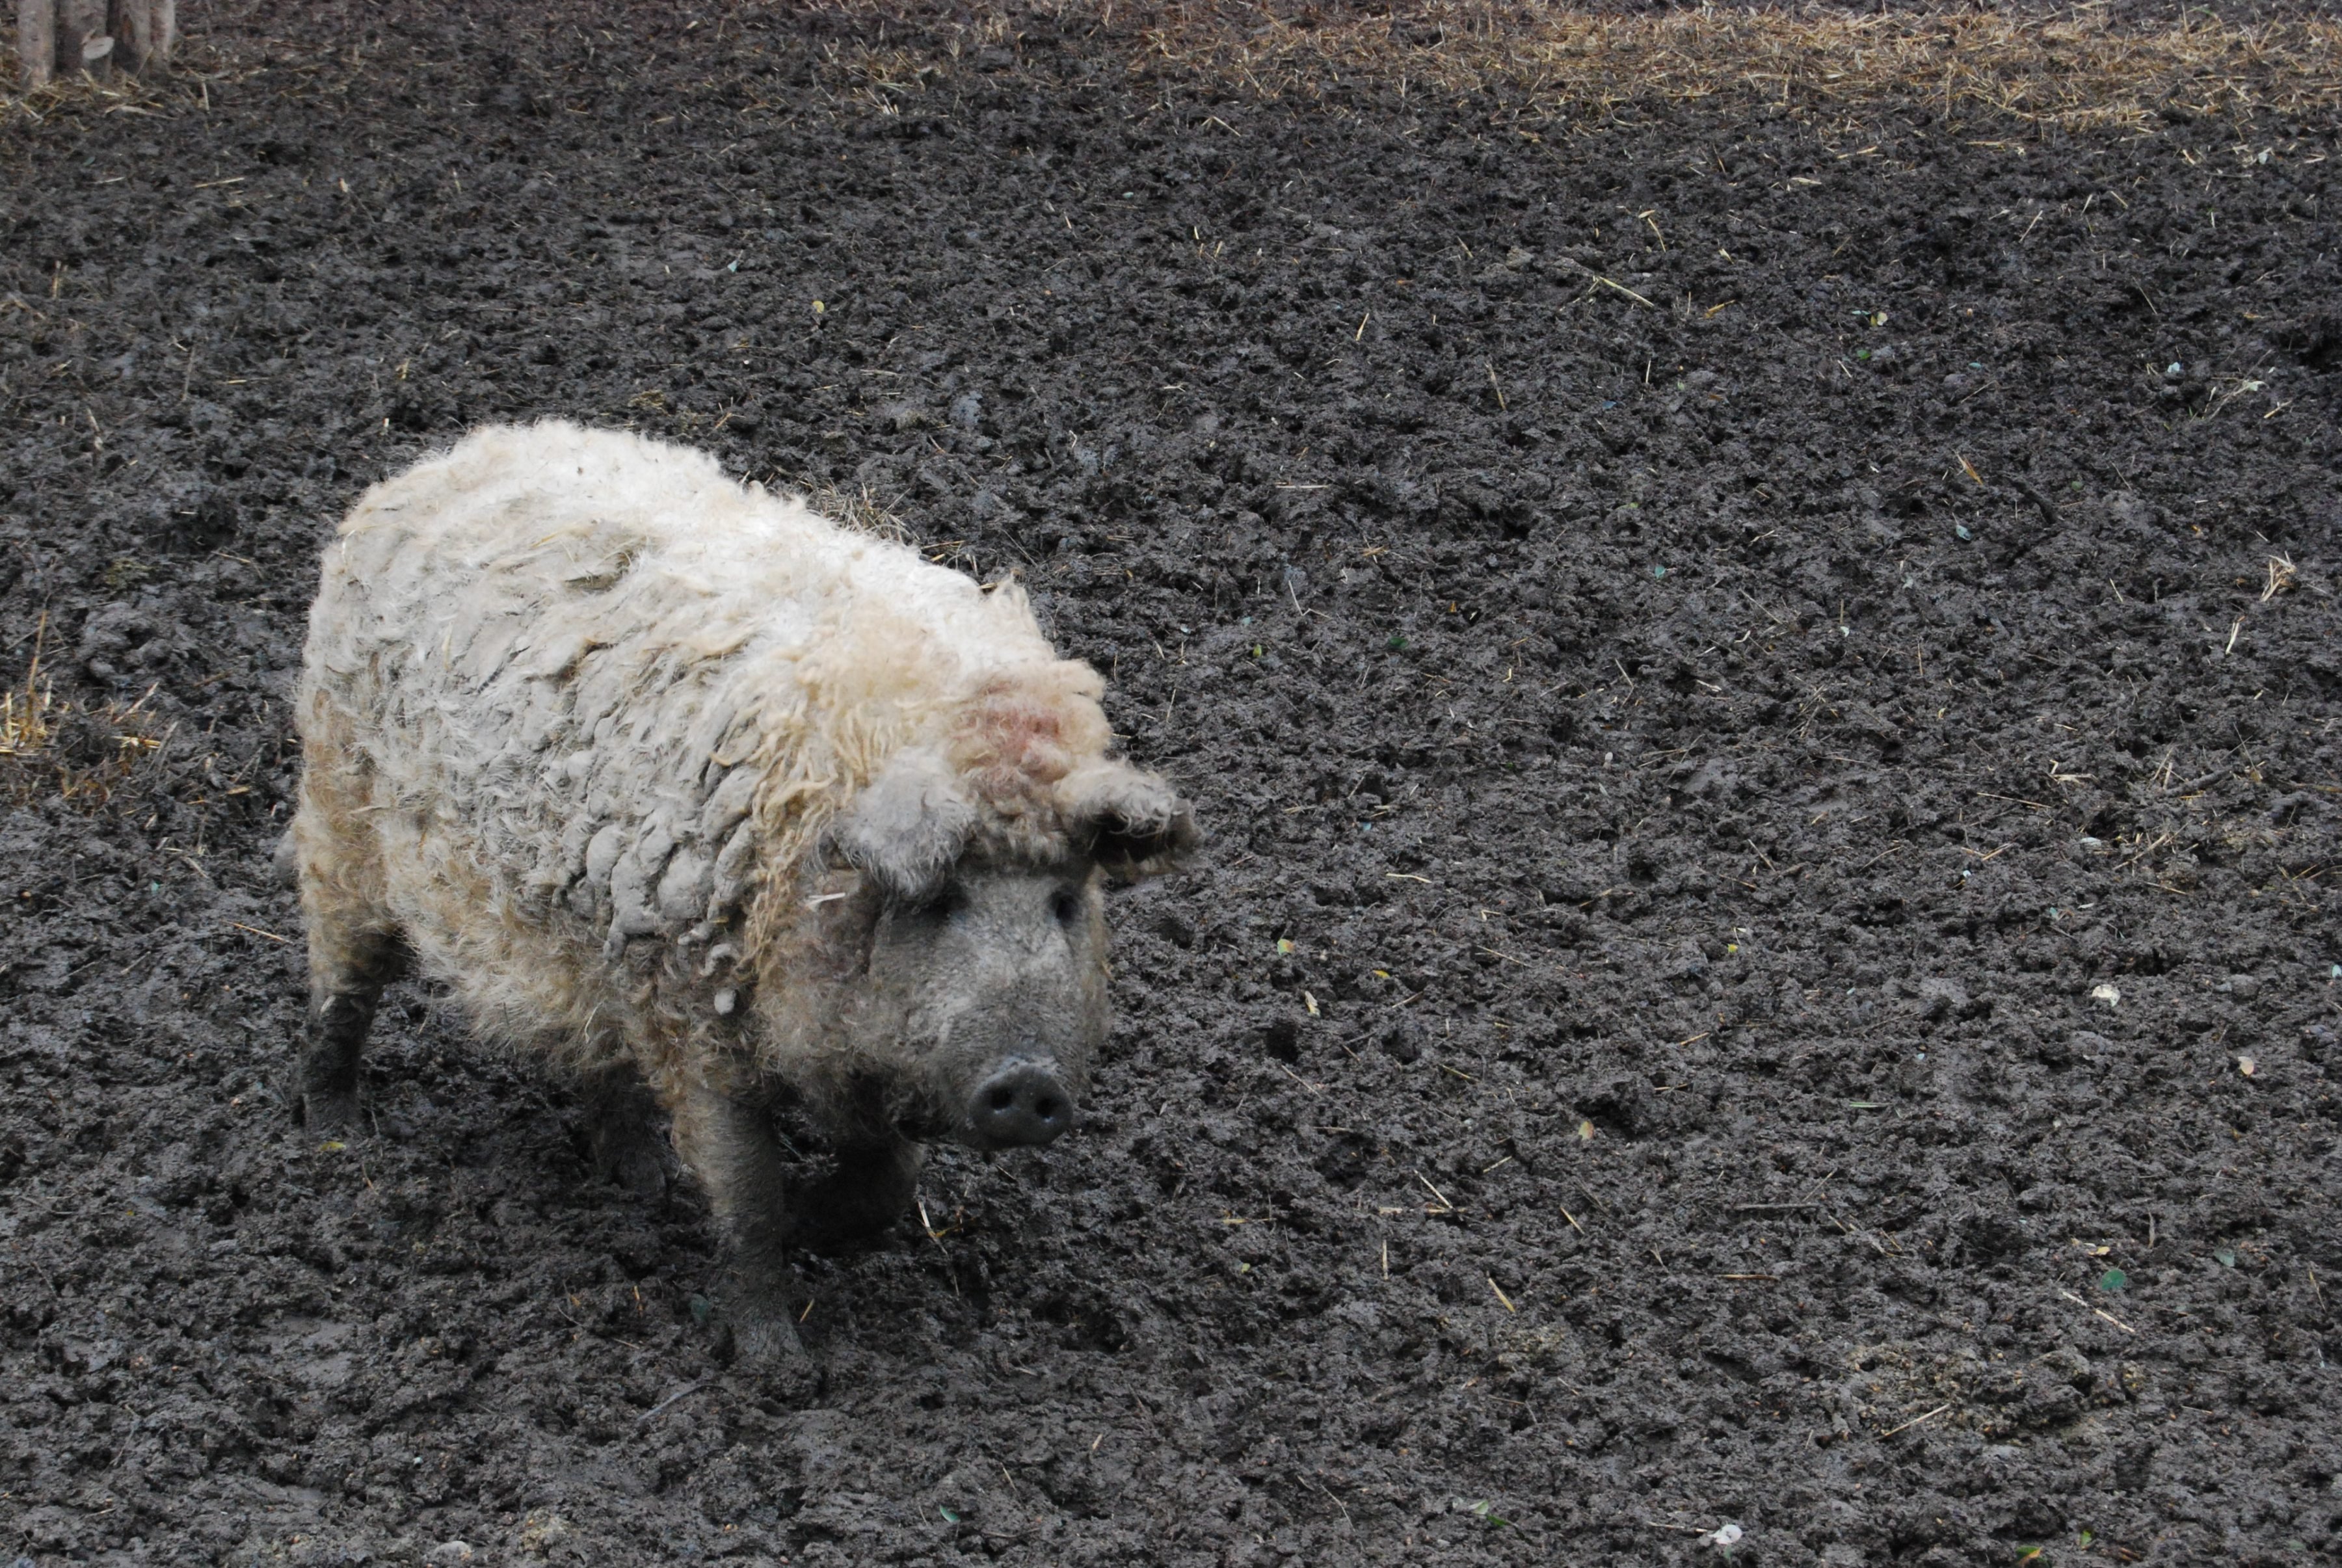 Mangalica, also known as a "sheep pig" | Animals Zone